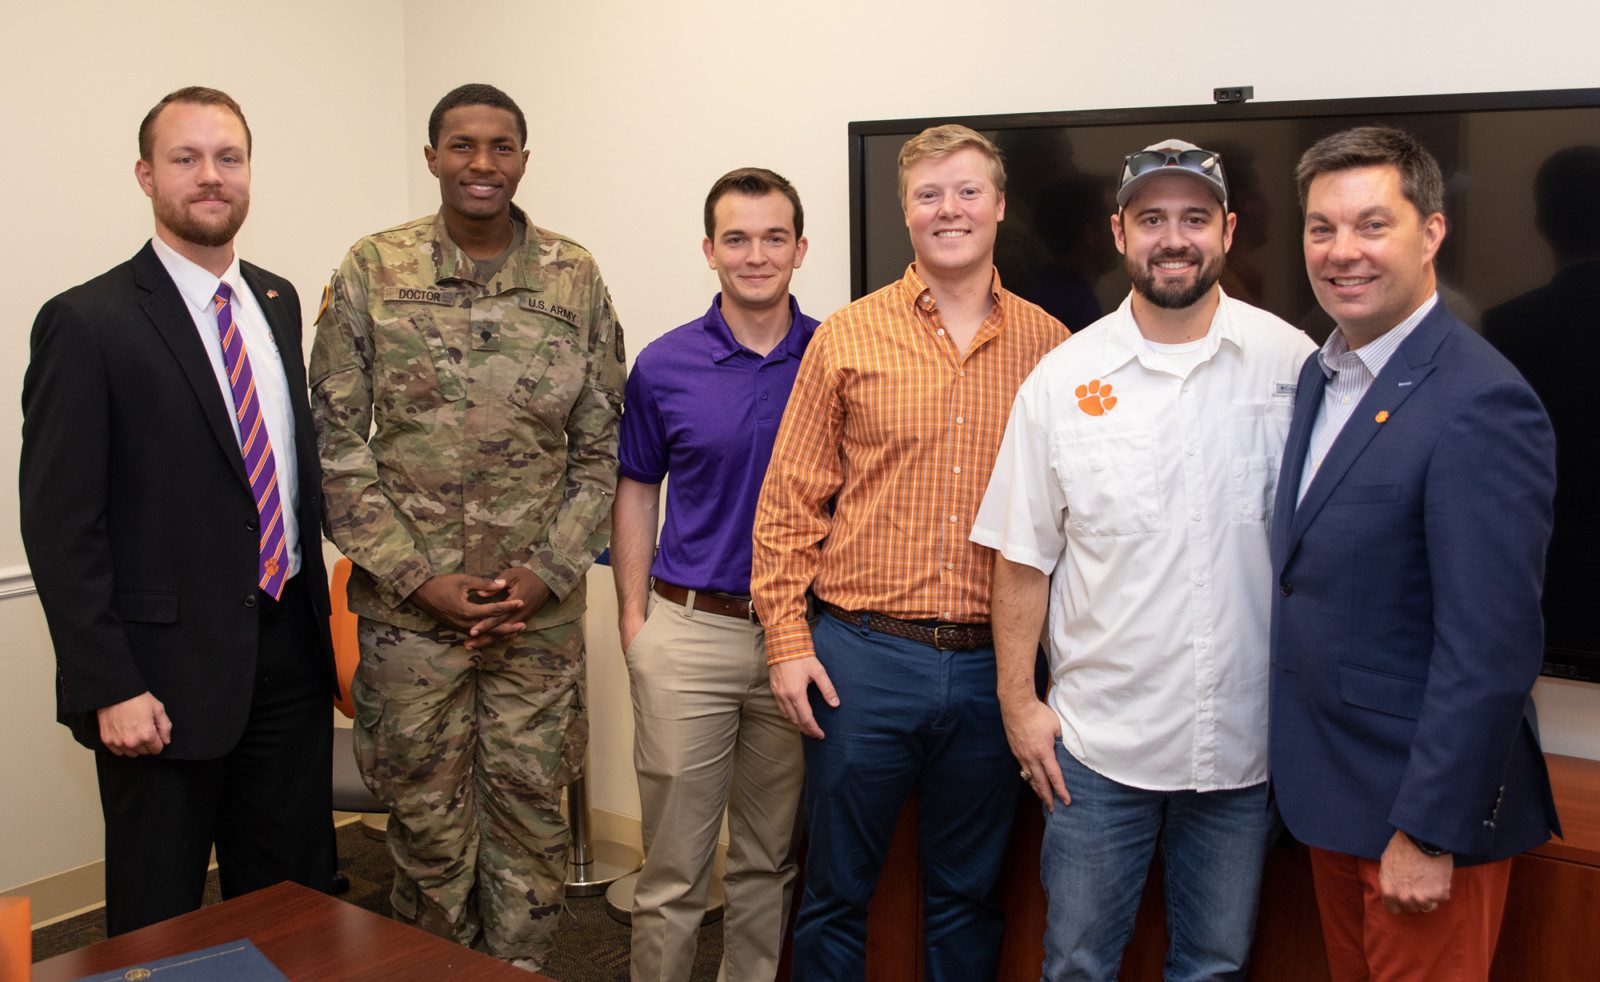 Photo of Brennan Beck (left), director of military and veteran engagement at Clemson, with Newport News Shipbuilding scholarship recipients Daquan Doctor, who serves in the Army National Guard; Damion Anderson, who served in the Marine Corps; Giff Finley, who served in the Coast Guard; and Stewart Fuller, who is on active duty with the Navy. At right is alumnus Matt Needy, who is the company’s vice president of operations.